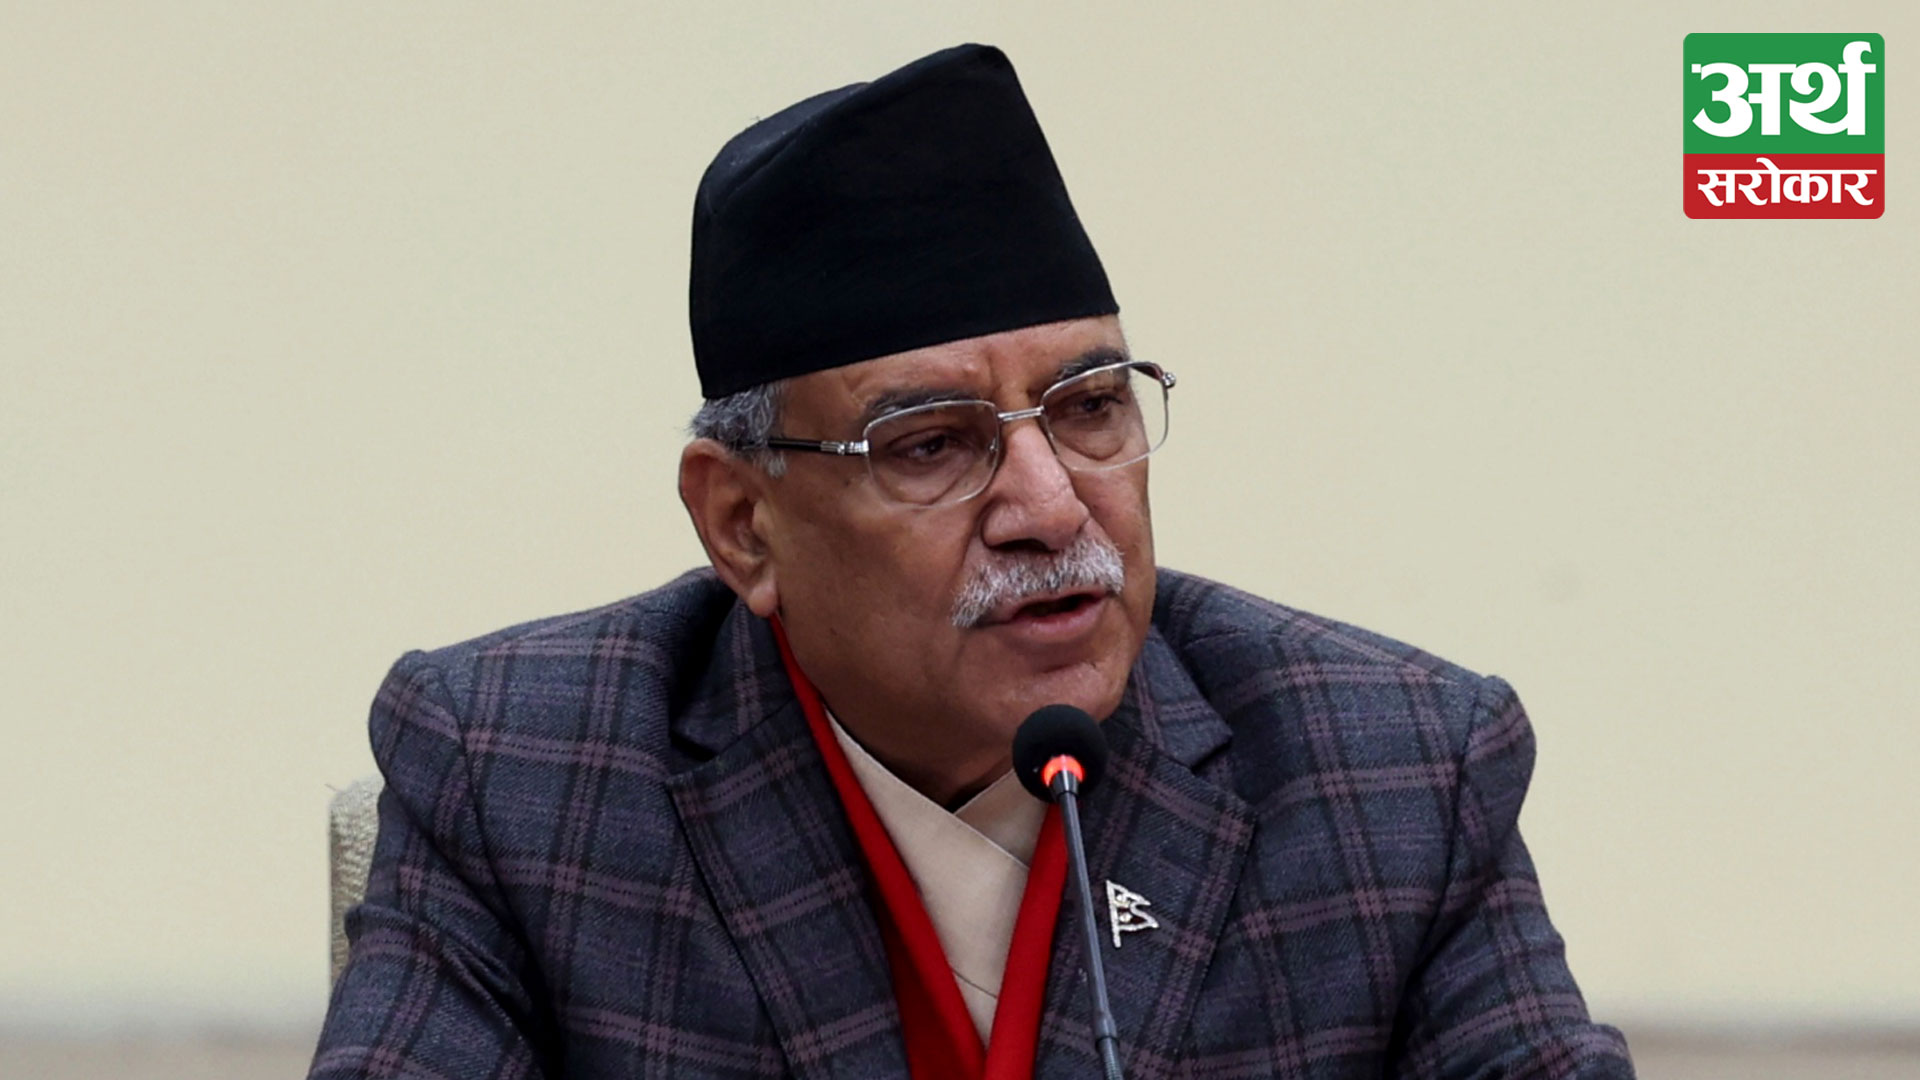 Prosperity through the use of technology, says Prime Minister Dahal